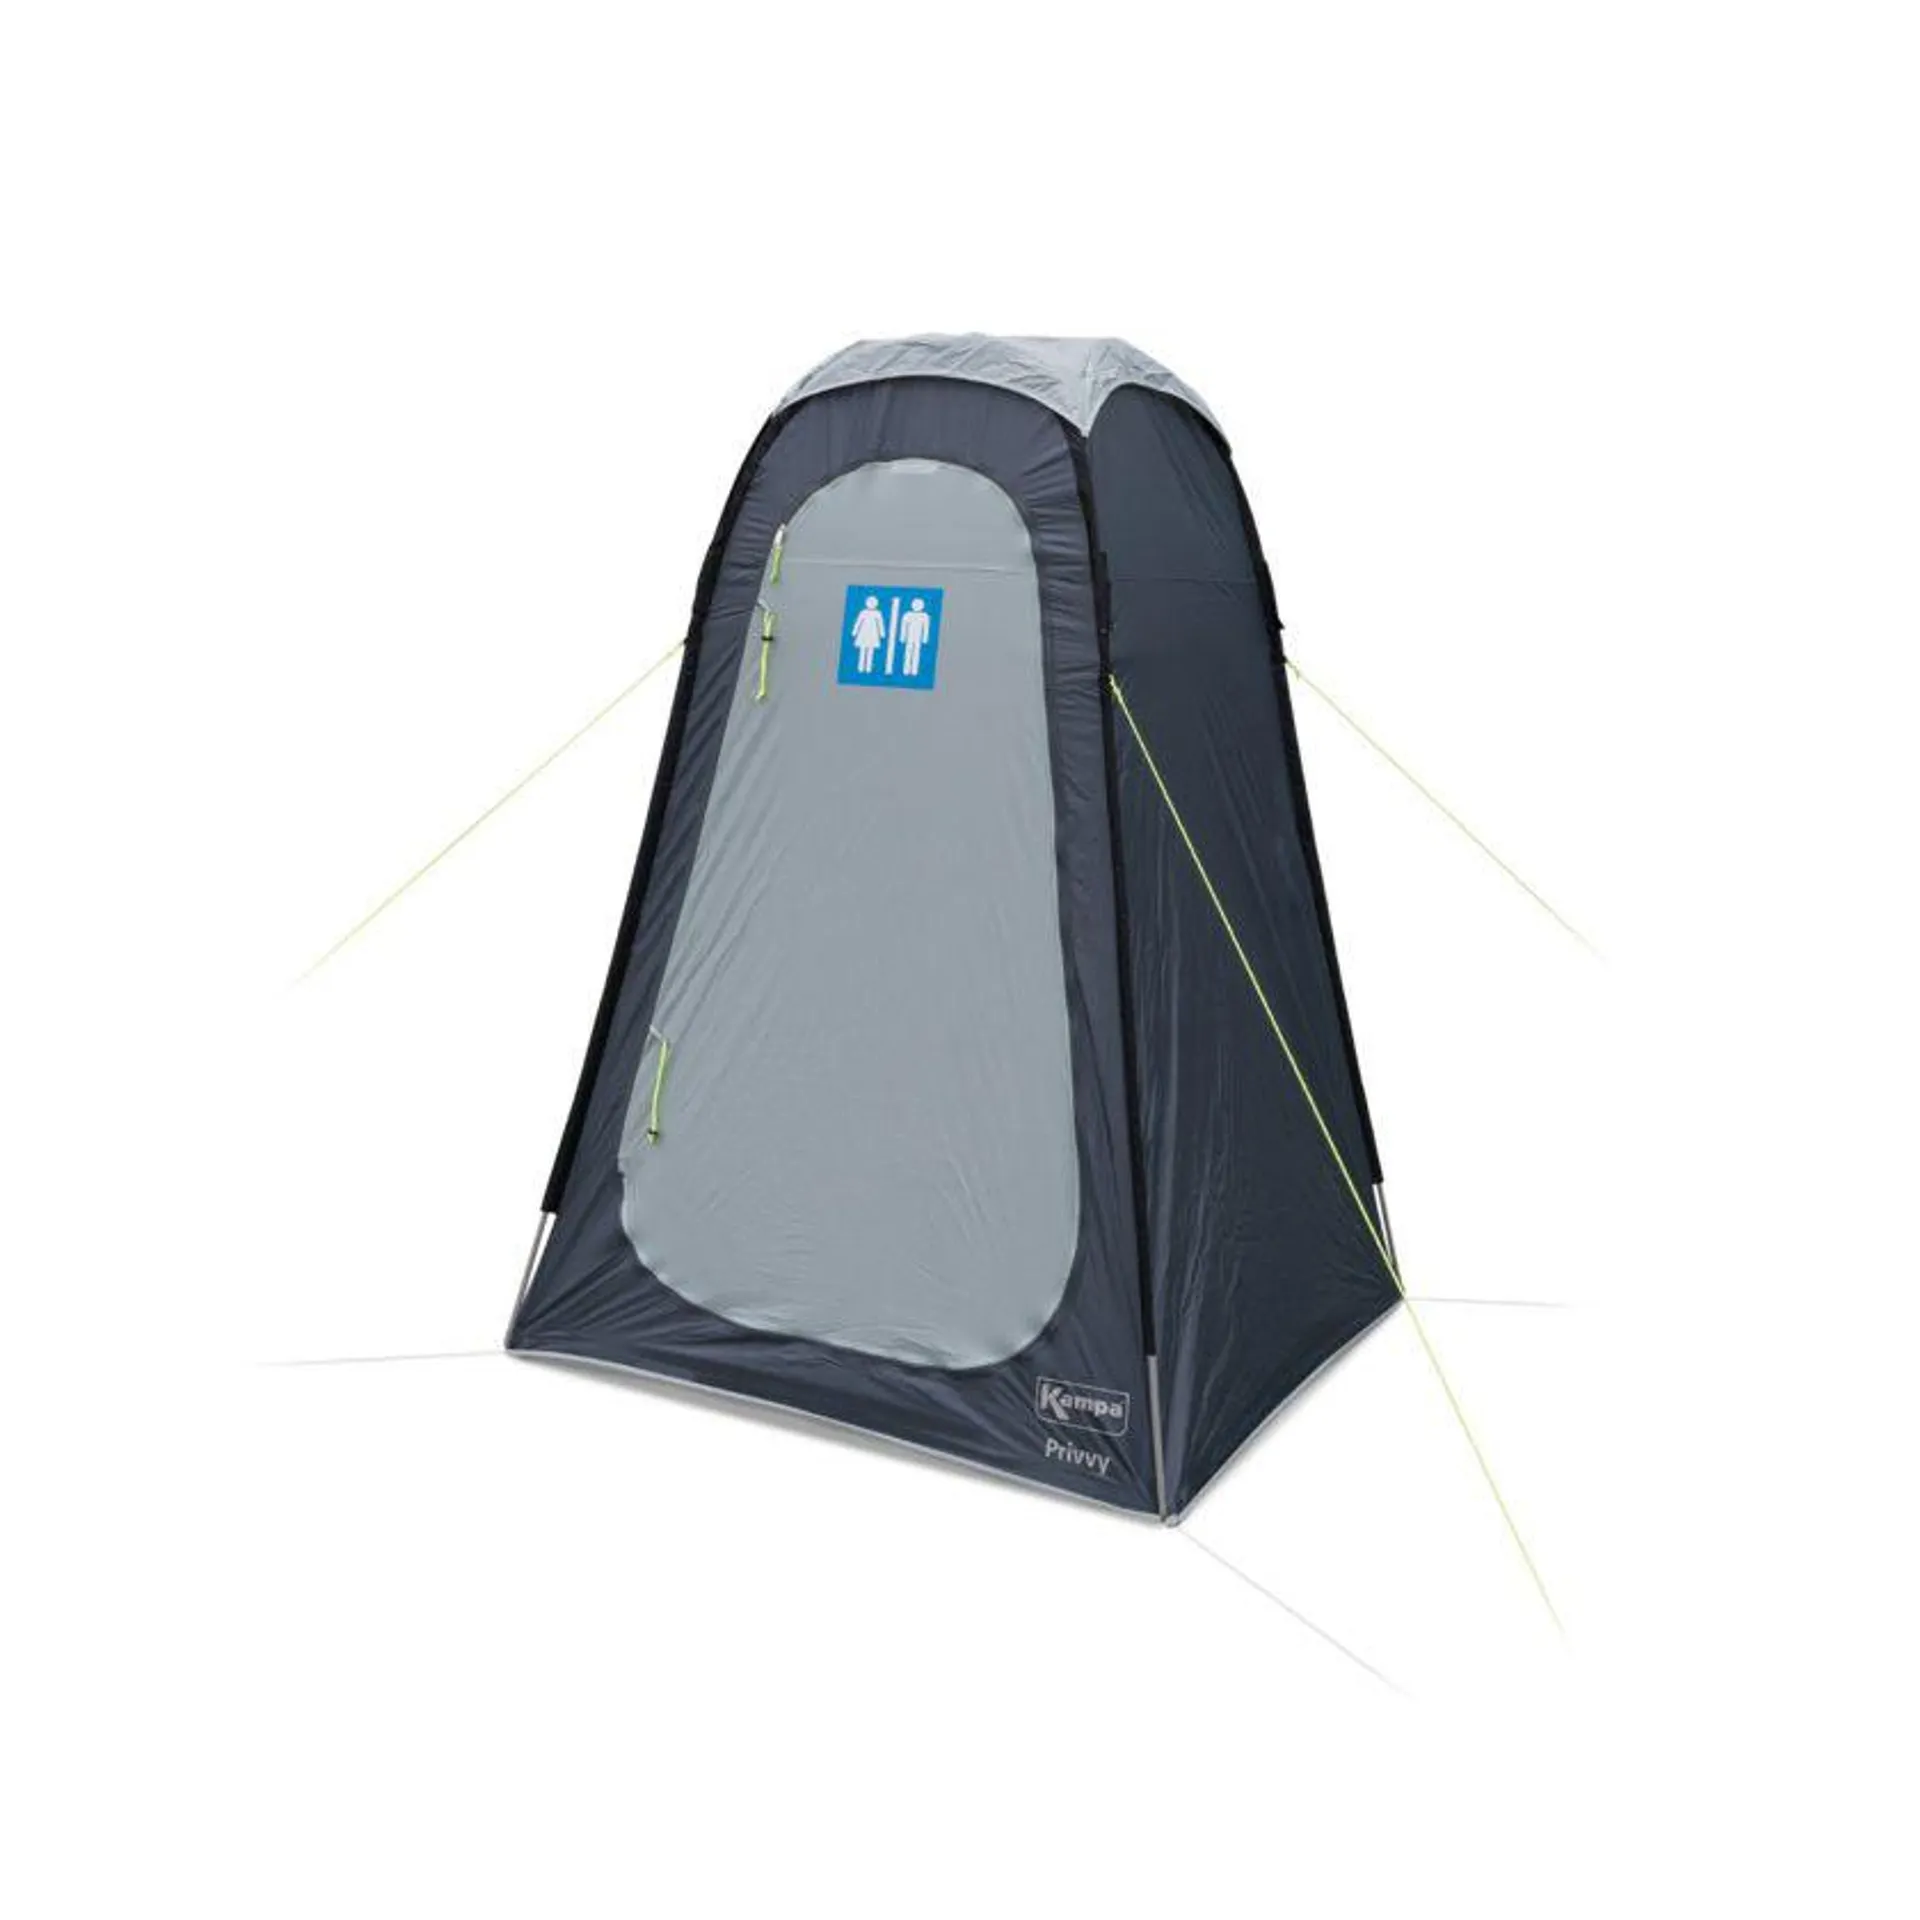 Dometic Toilet/Changing Tent